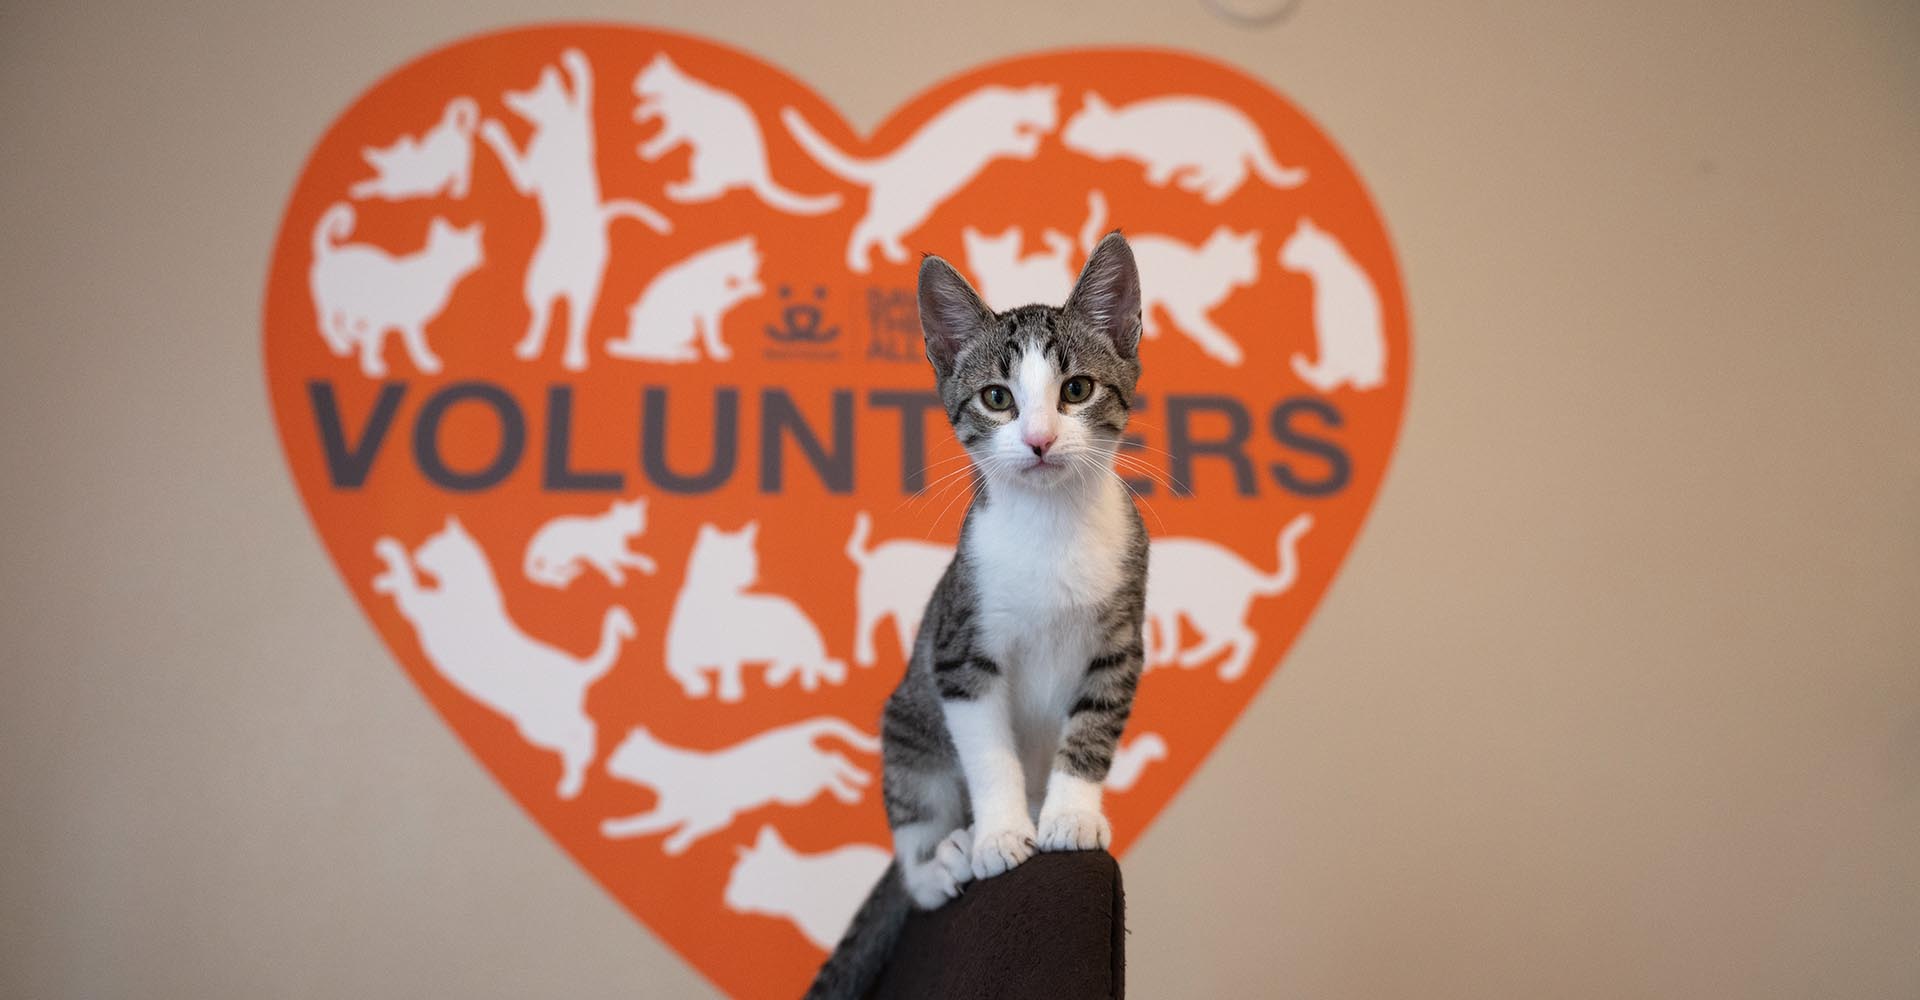 Kitten stands in front of a heart-shaped wall mural with the text "Volunteers" surrounded by images of cats